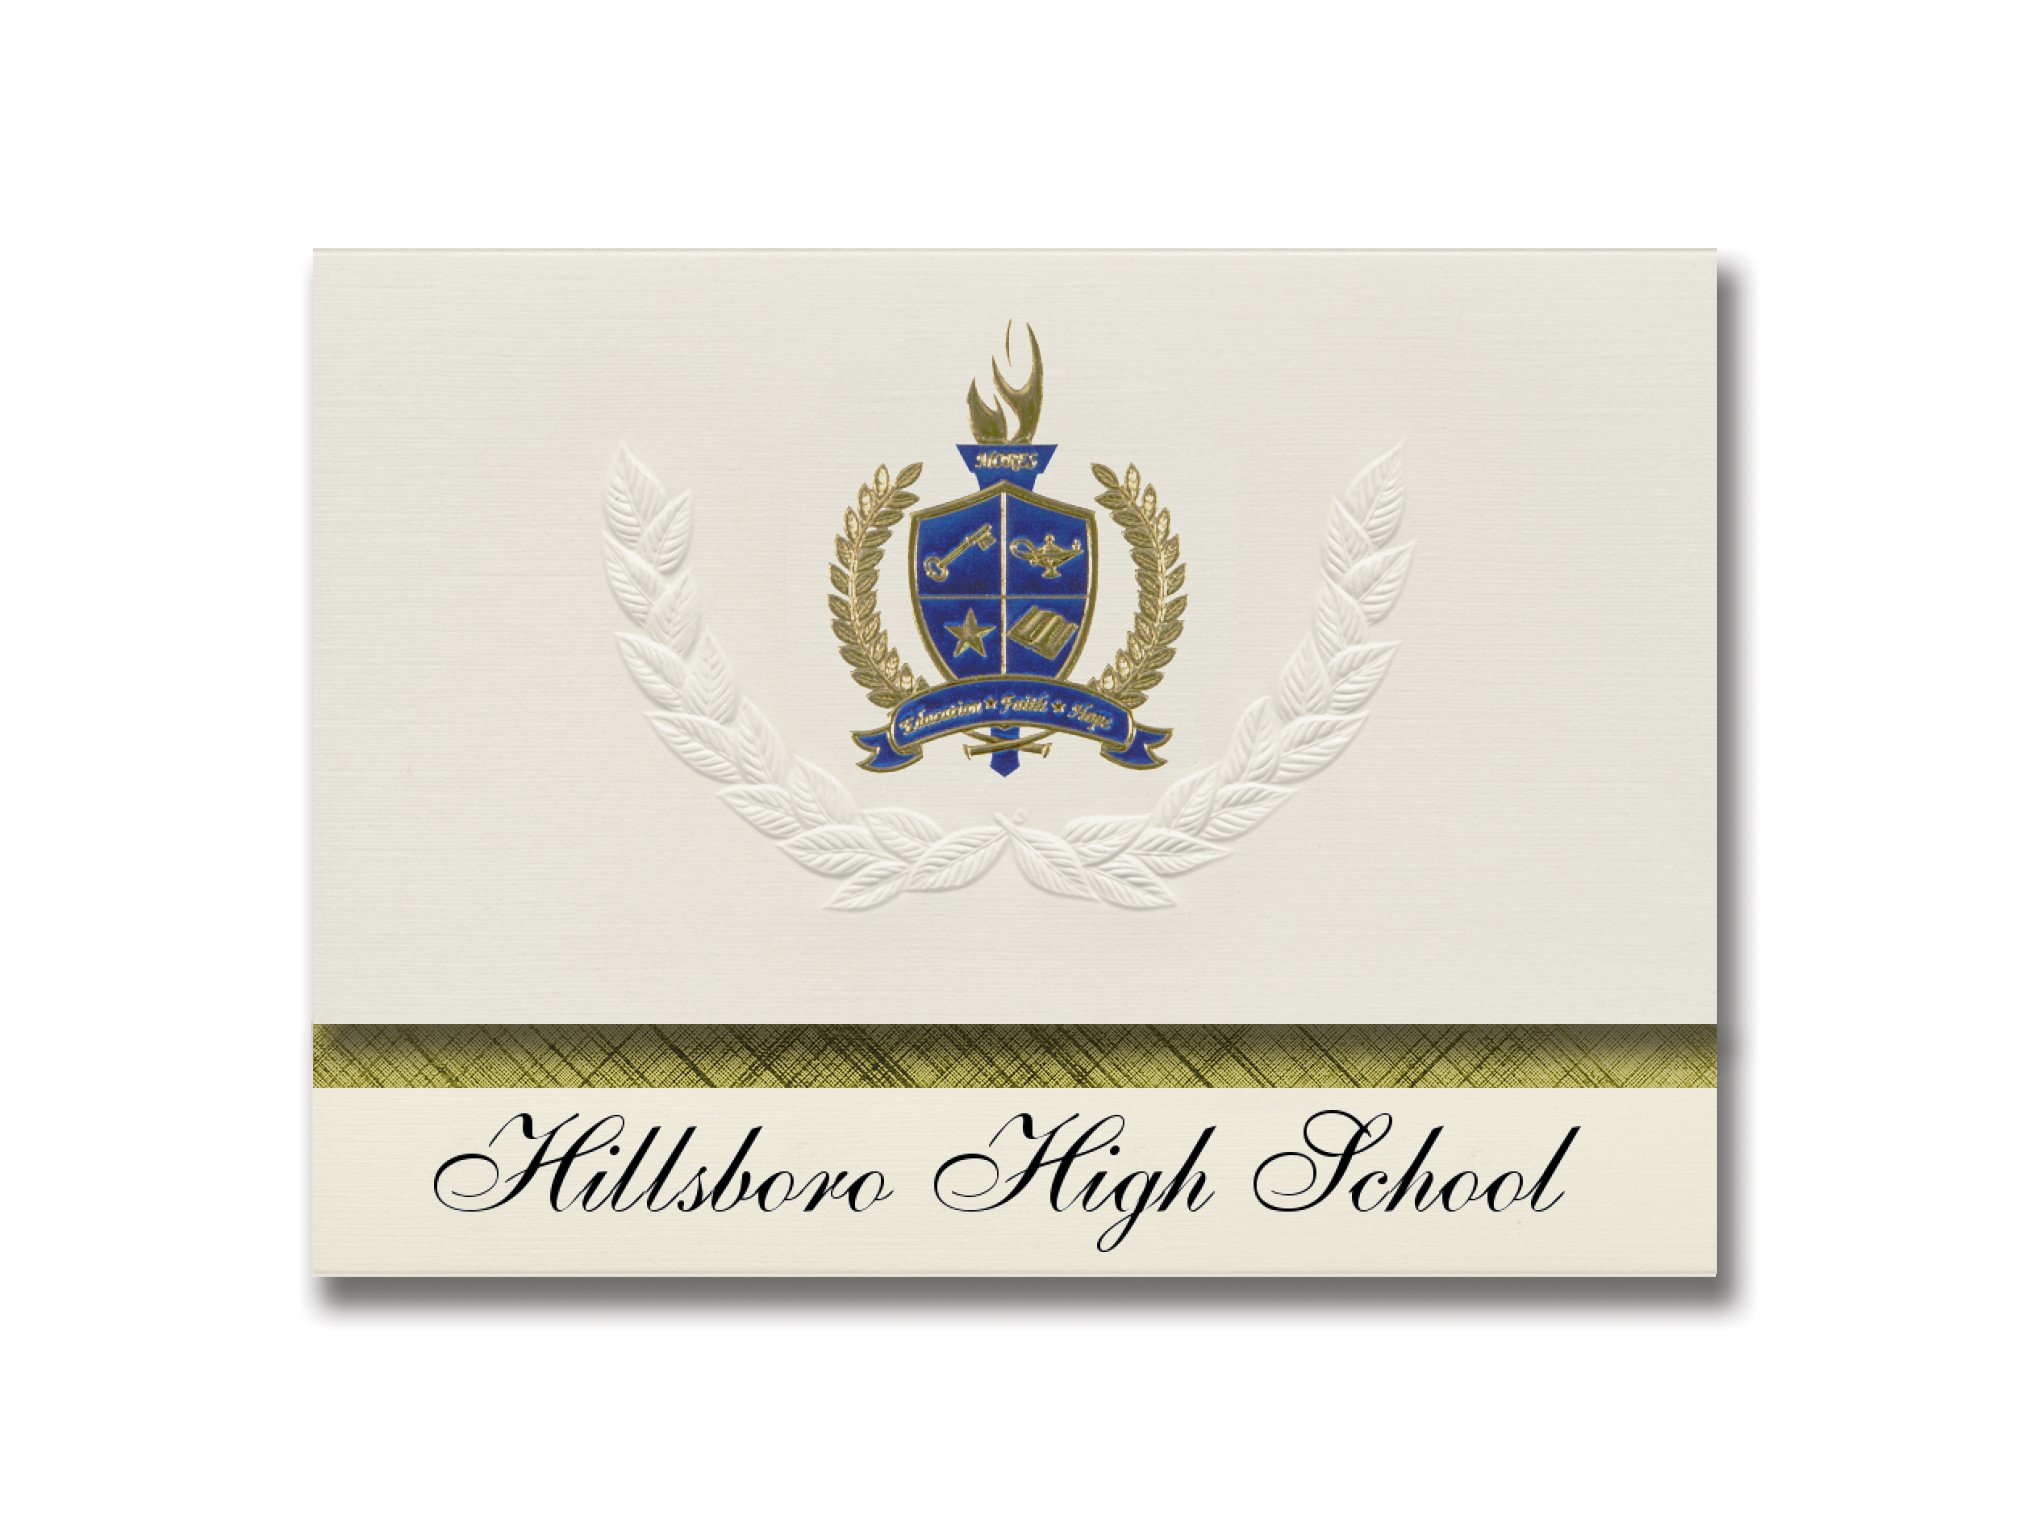 Signature Announcements Hillsboro High School (Hillsboro, ND) Graduation Announcements, Presidential style, Elite package of 25 with Gold & Blue Me...